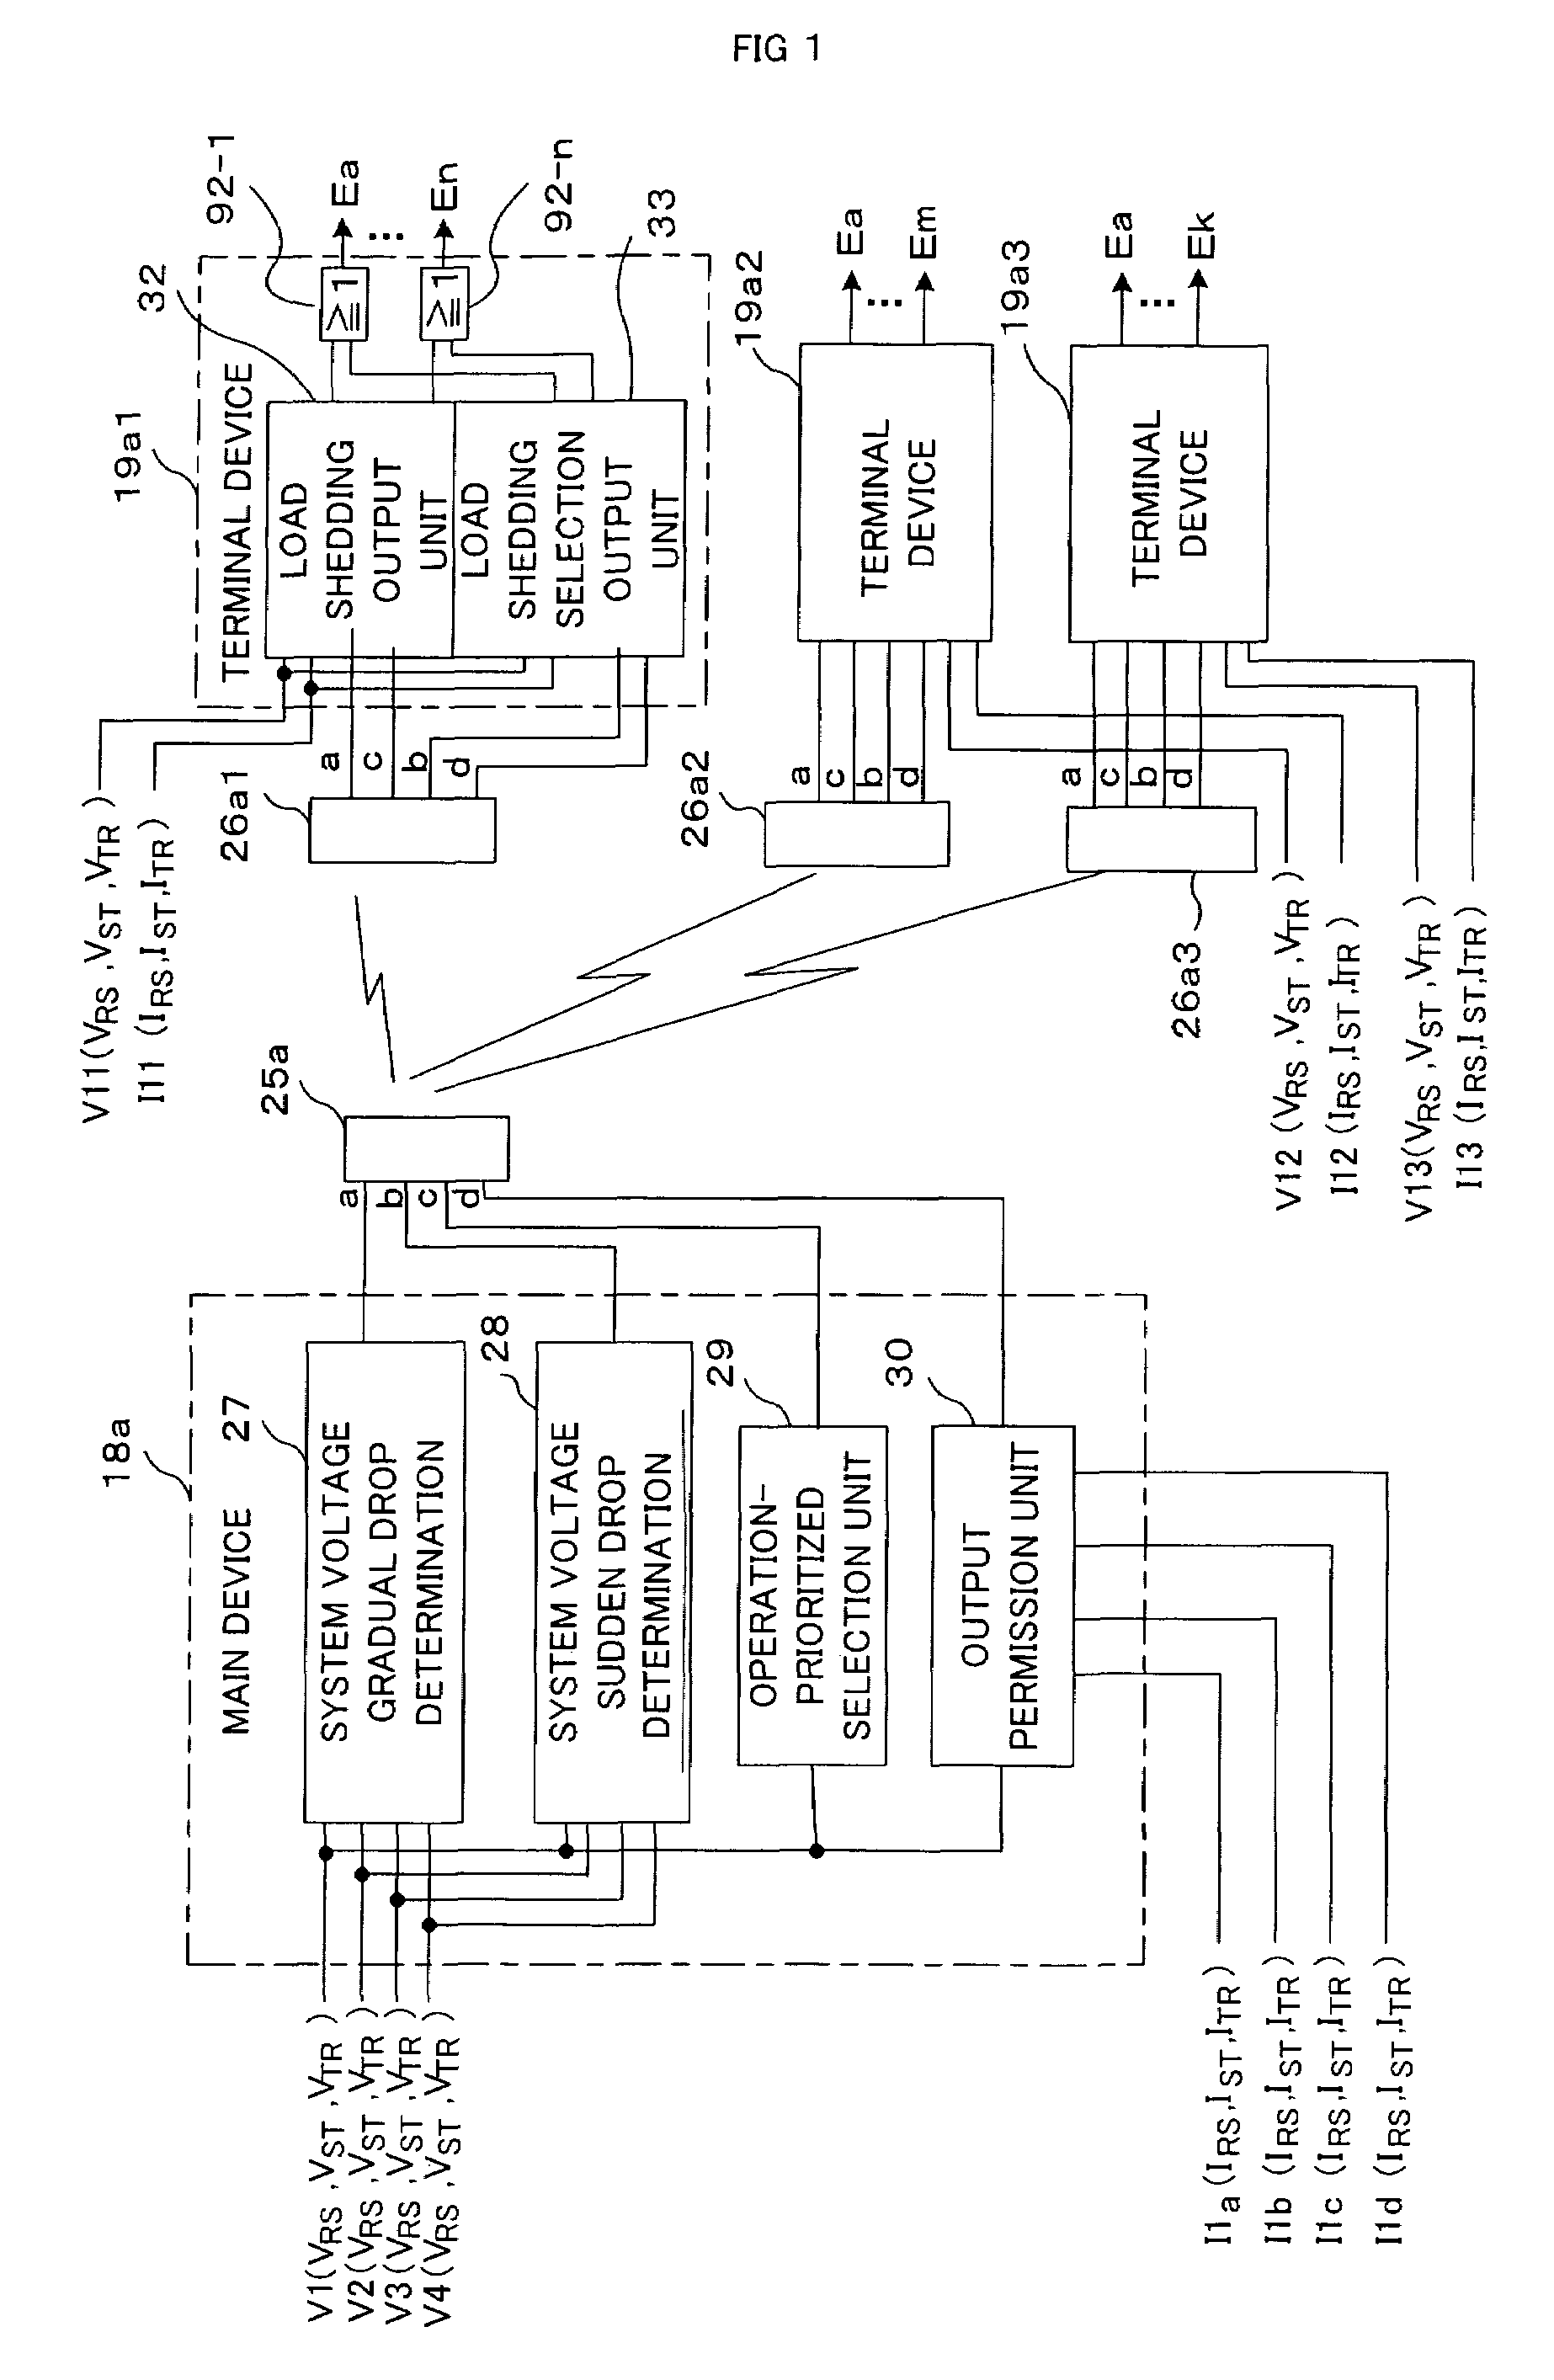 Power system protection system